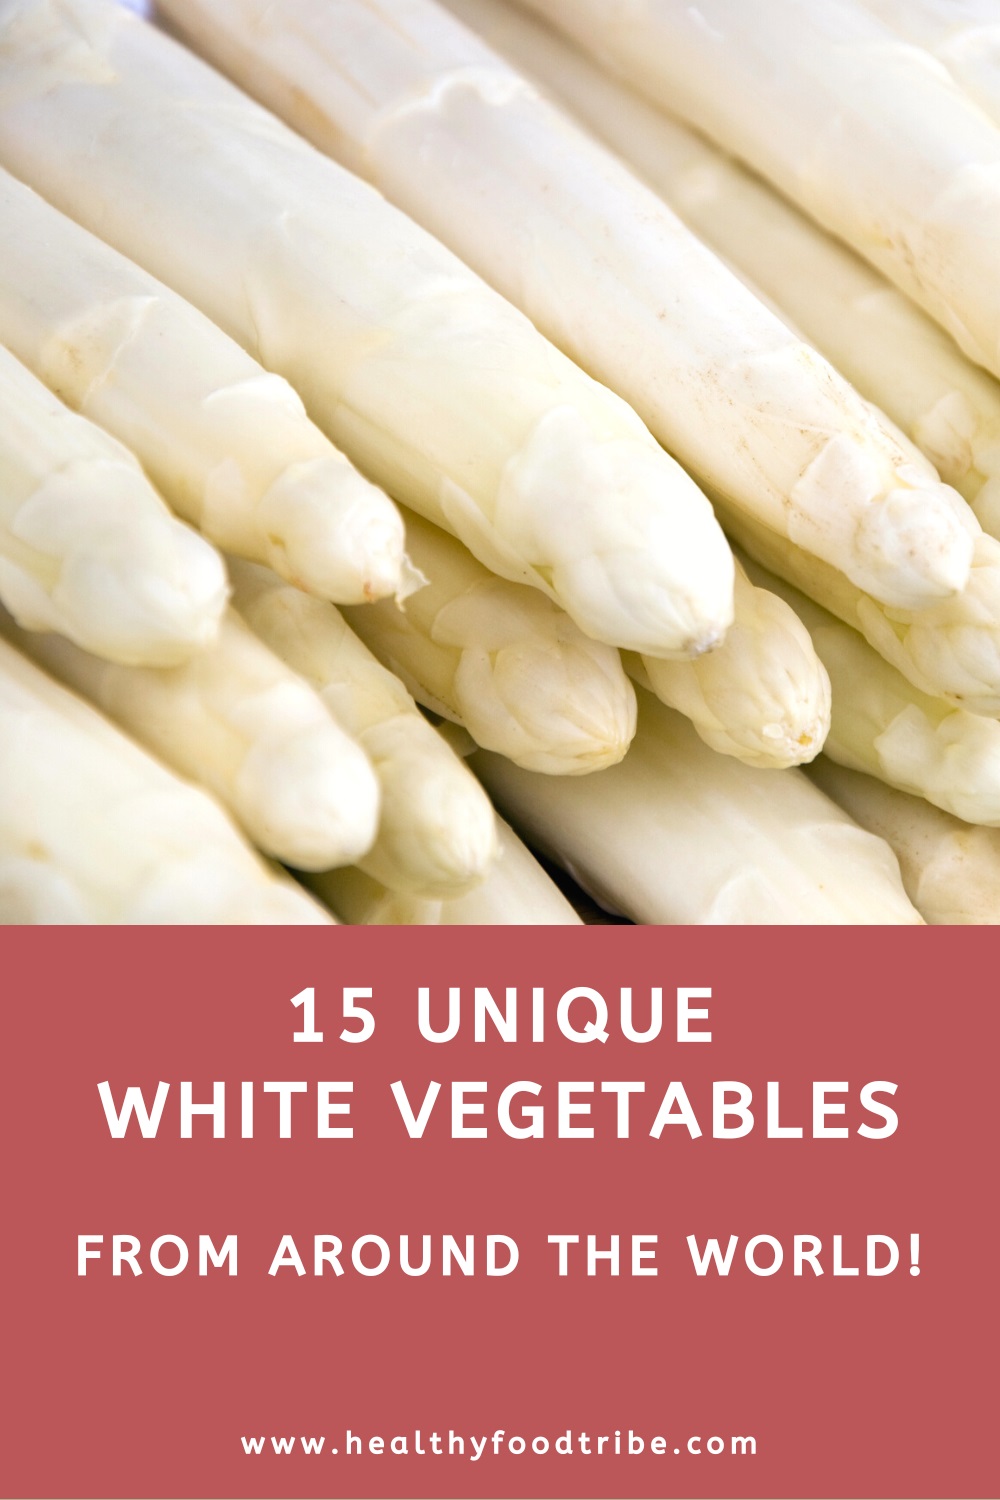 15 Unique white vegetables from around the world